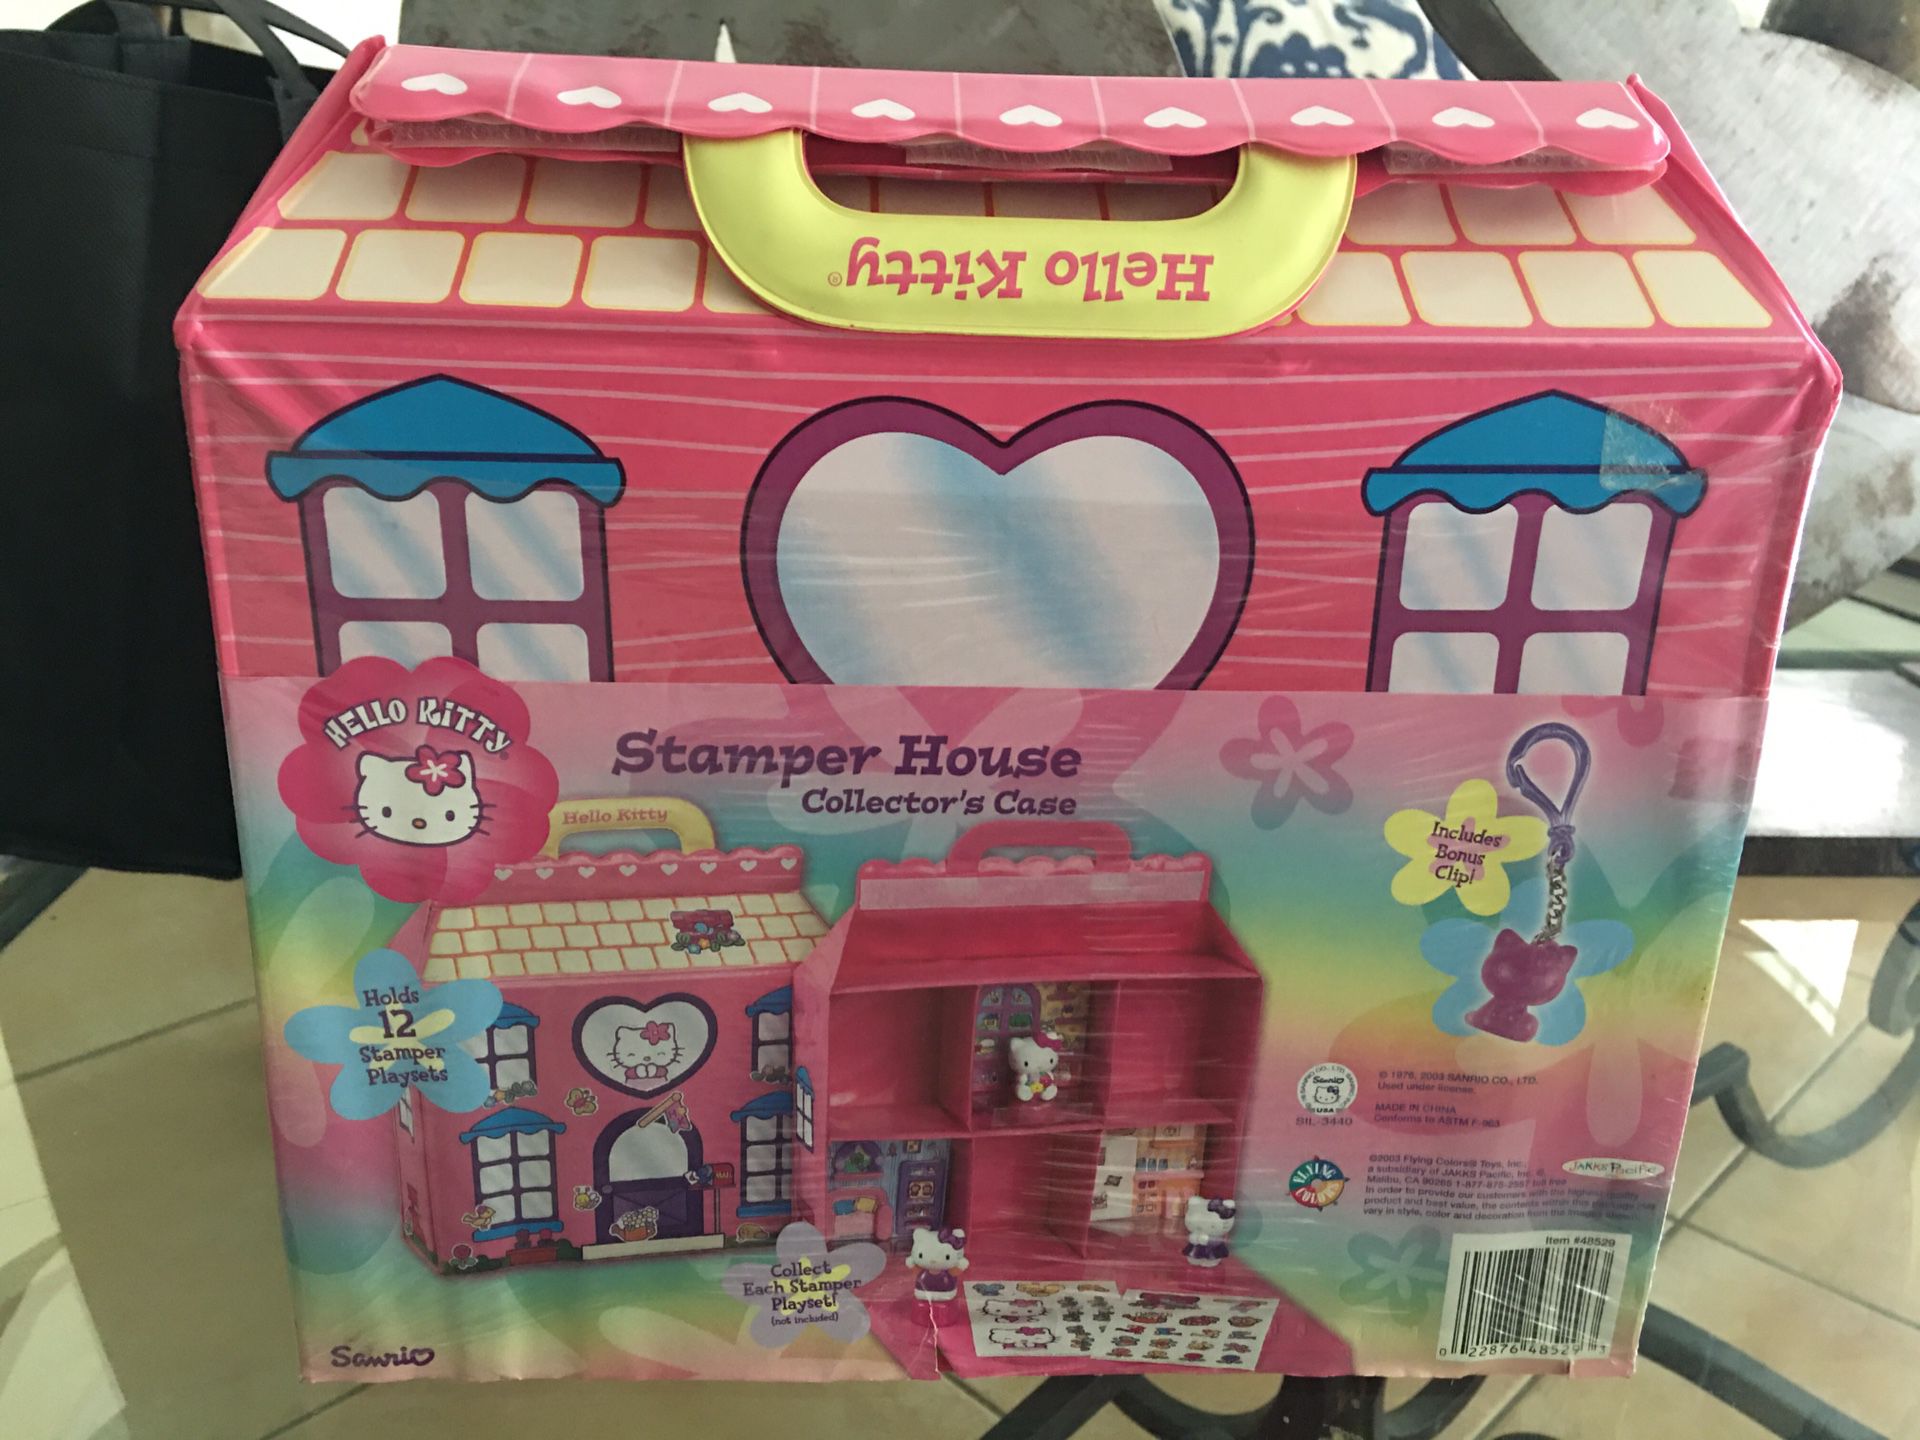 Hello Kitty Stamper House Collector’s Case